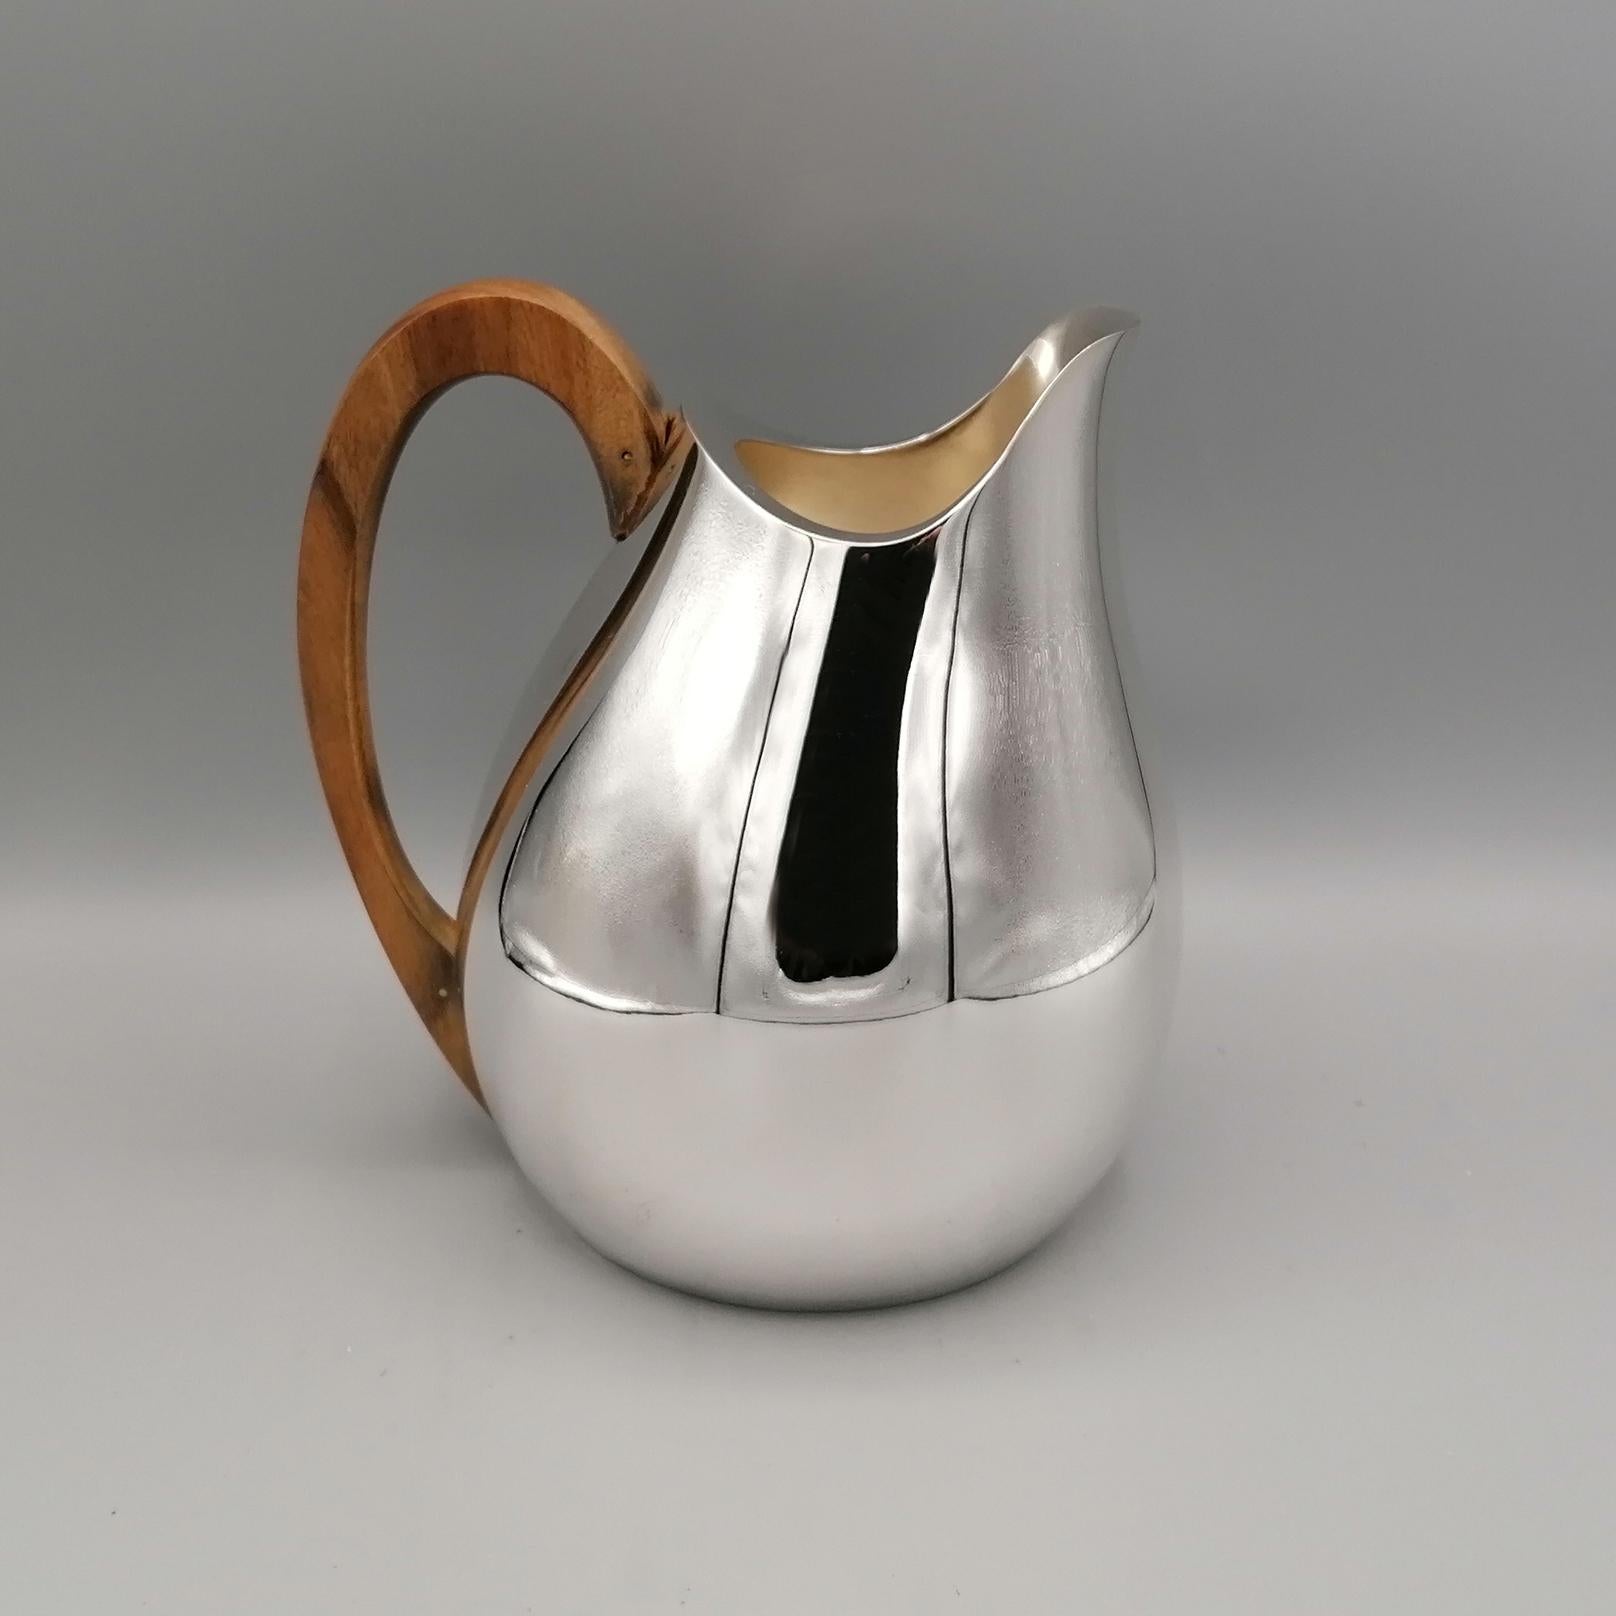 Other 21st Century Italian Sterling Silver Jug with wood Handle